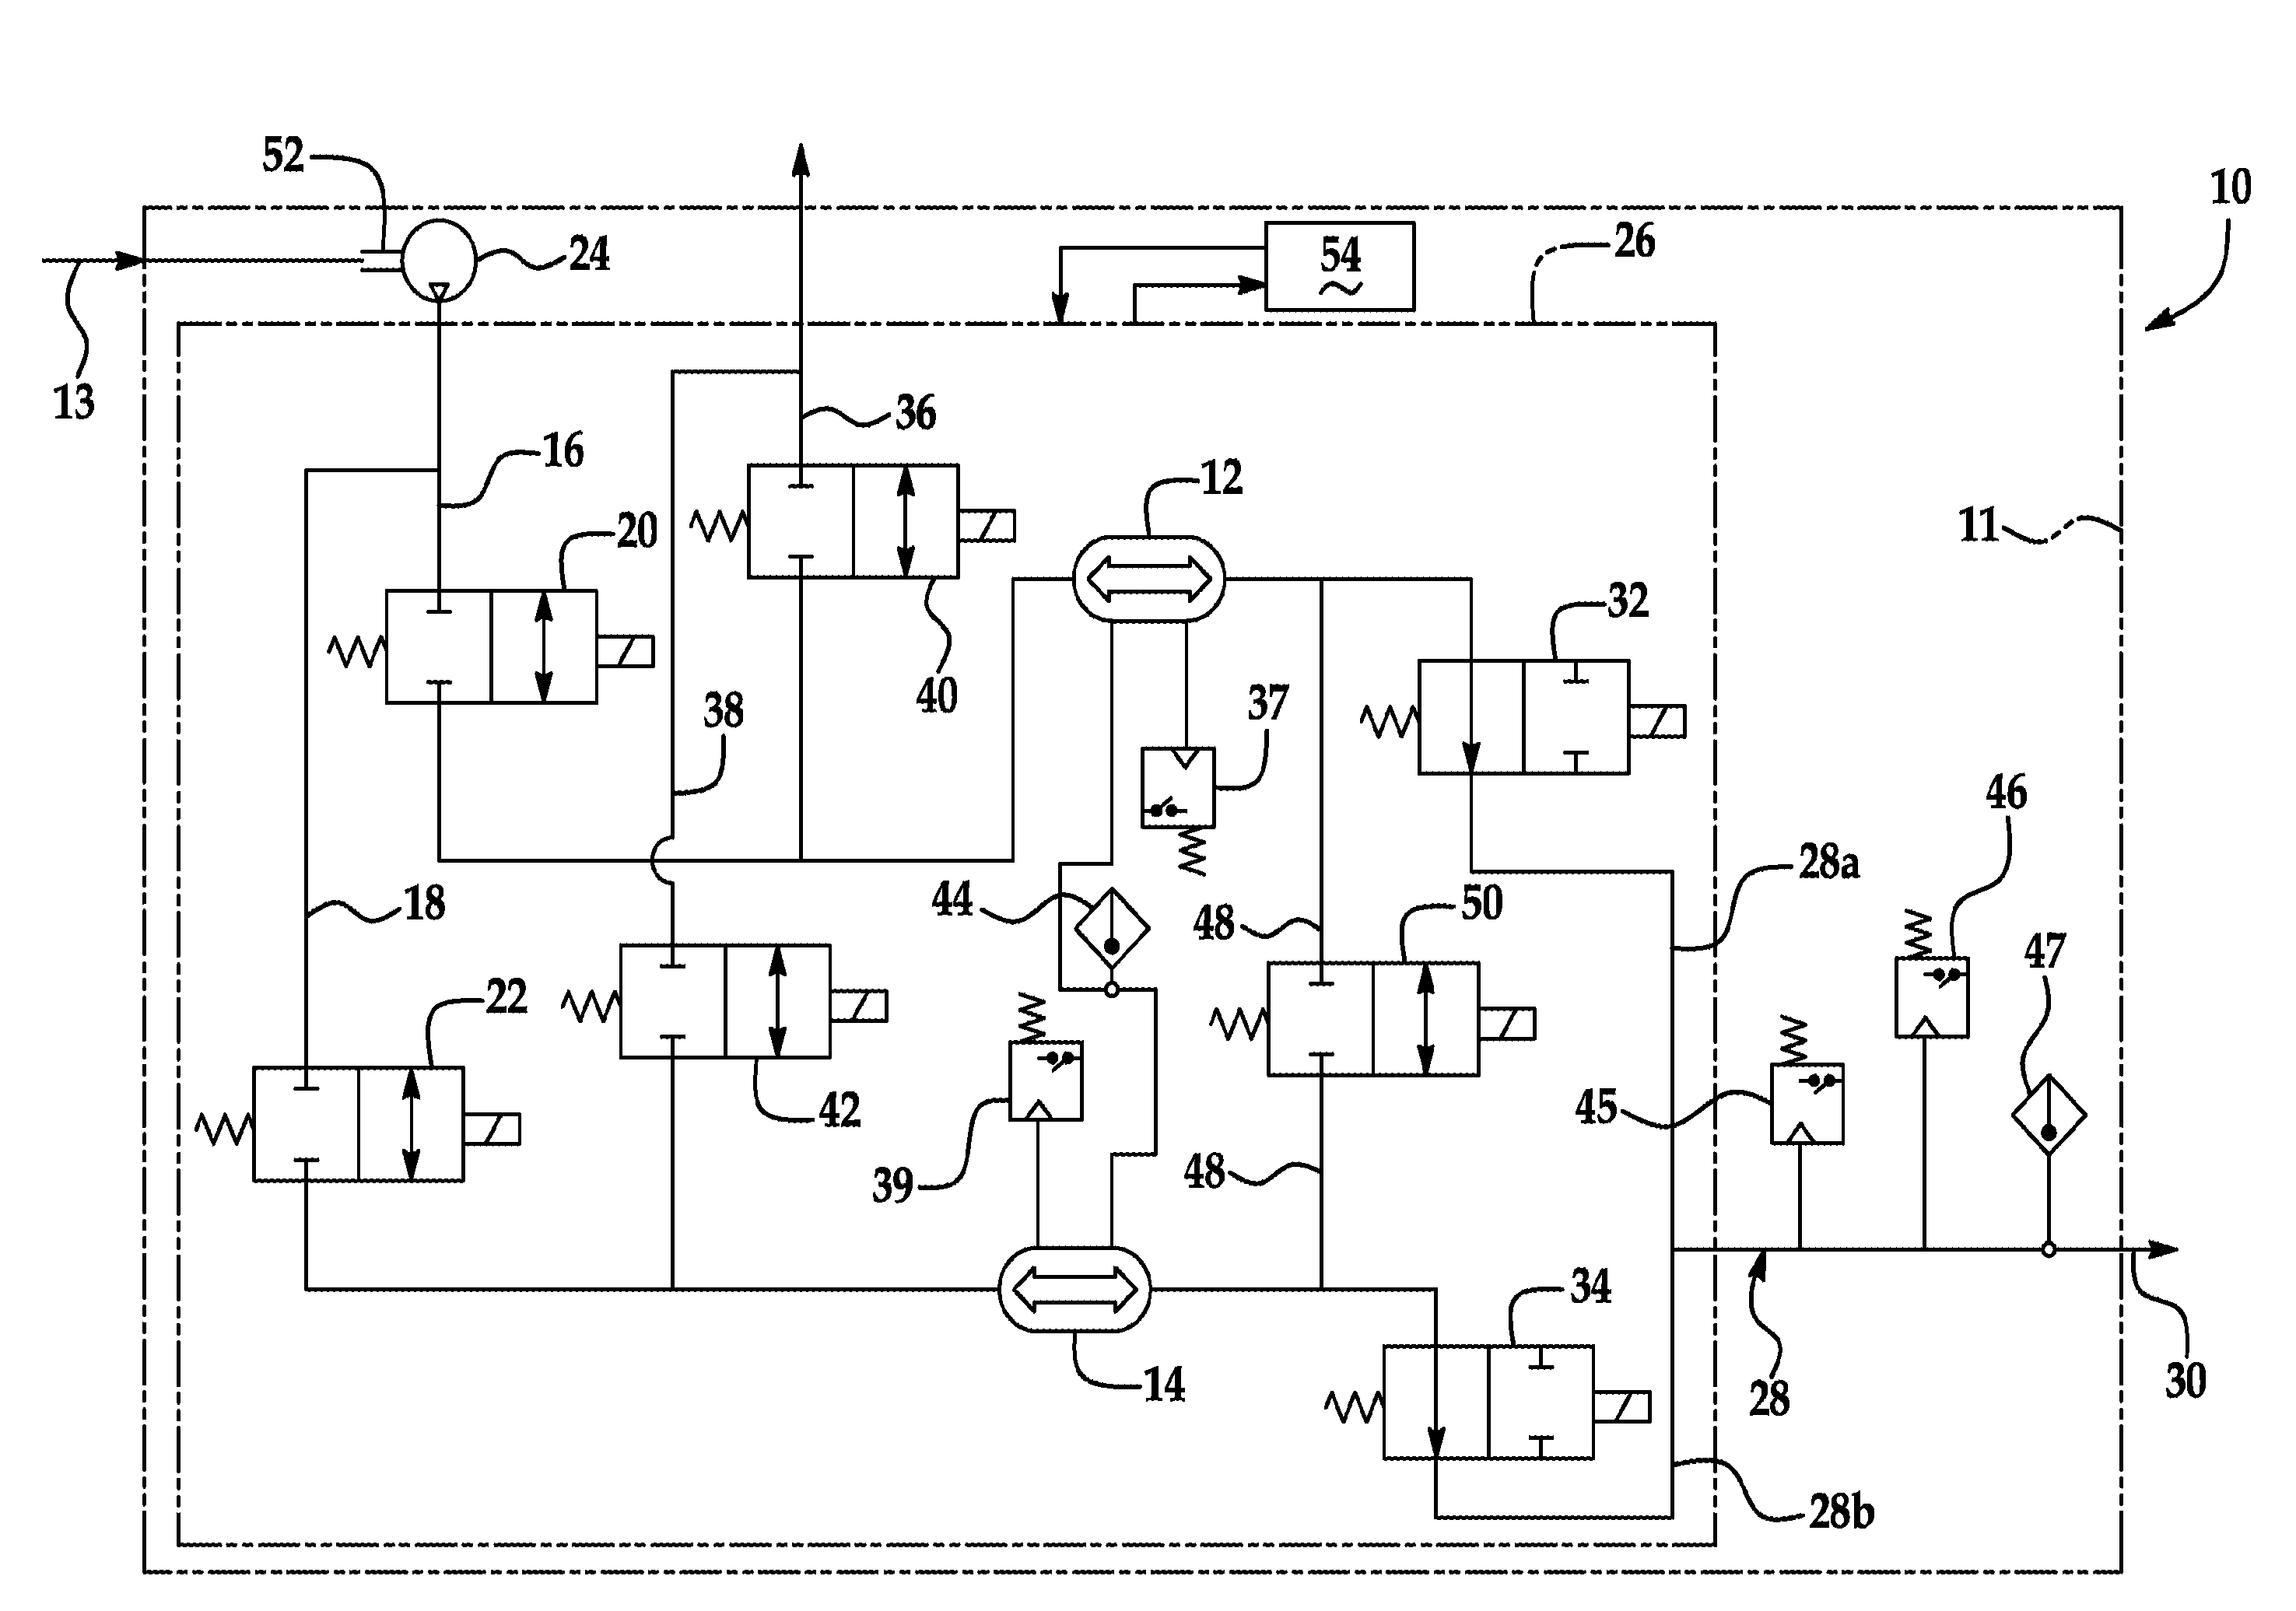 Damping apparatus for scroll compressors for oxygen-generating systems